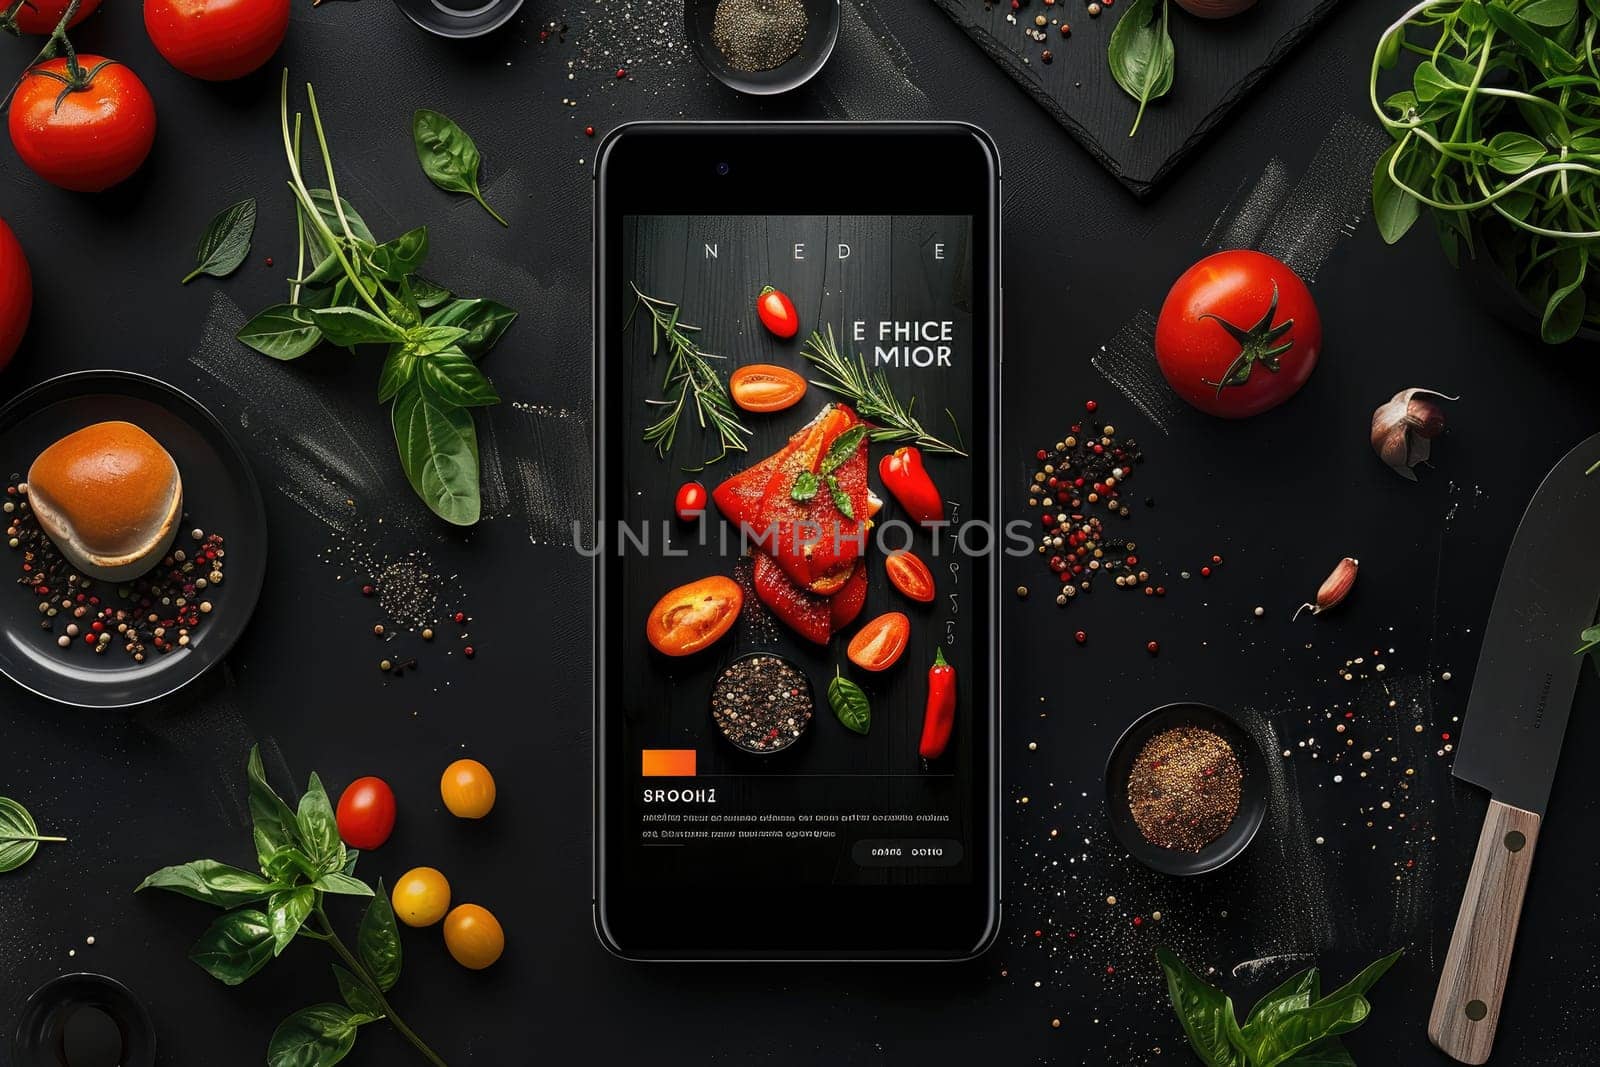 UI Application design for food school, dynaic, black, white, orange and red colors